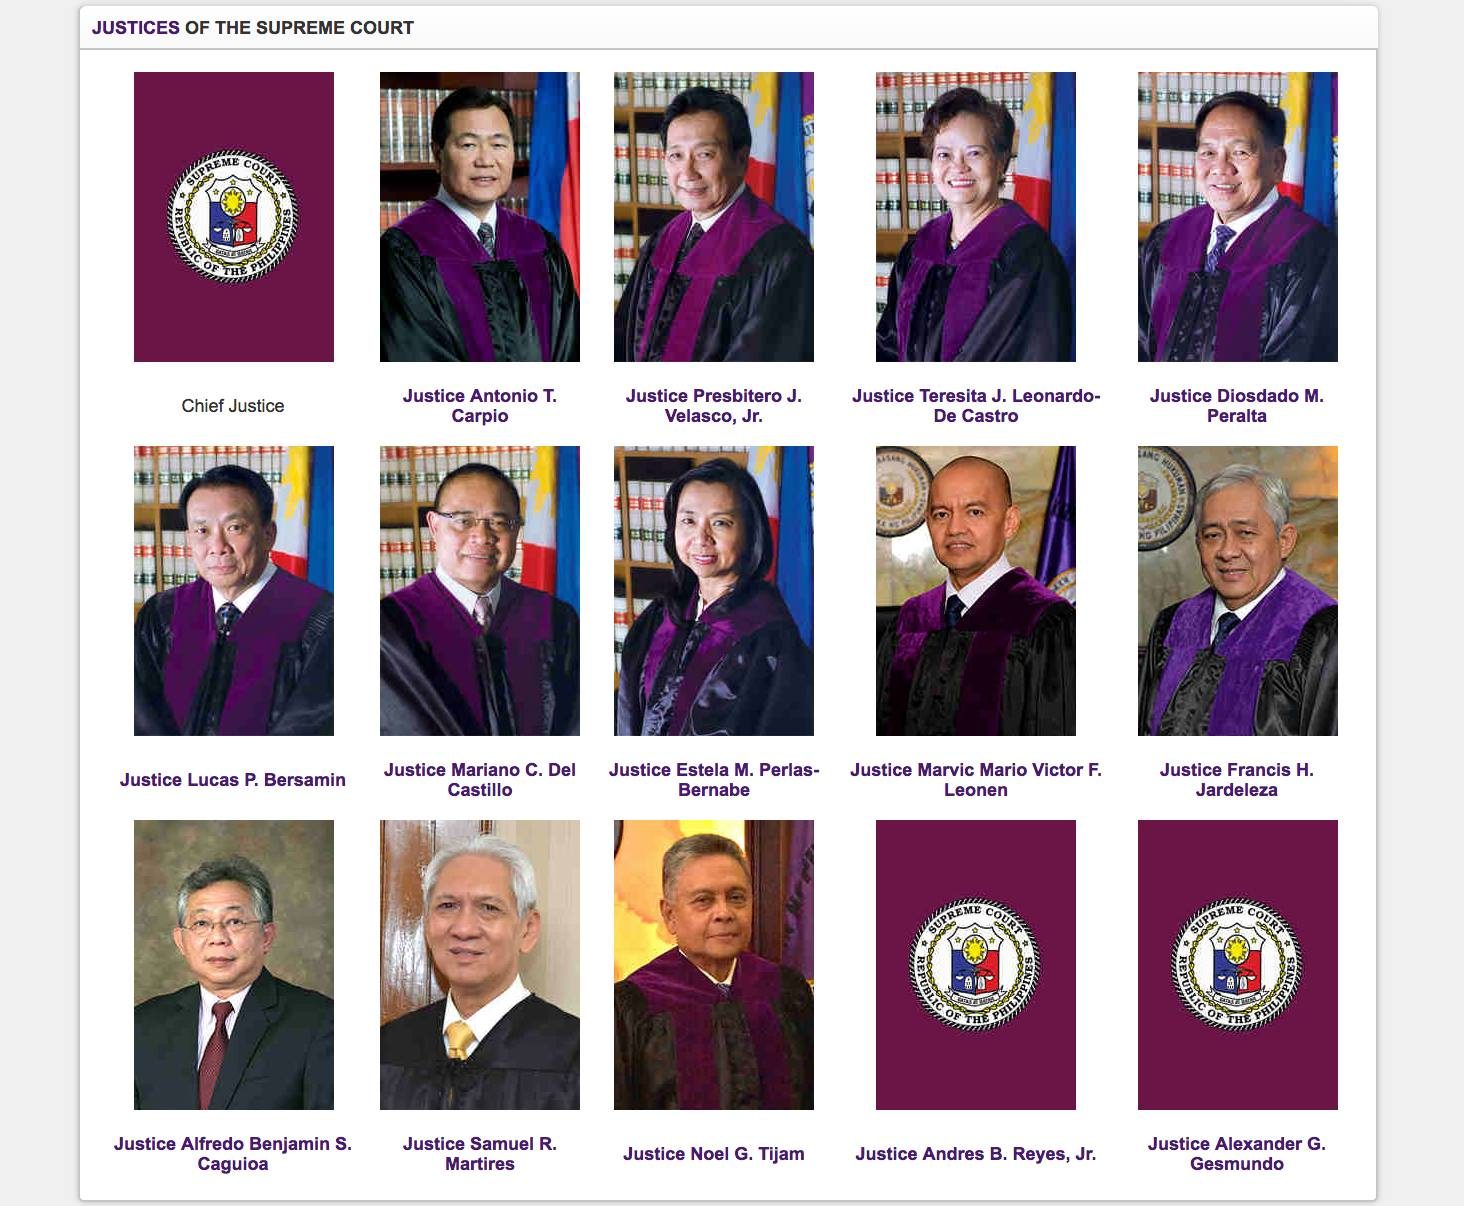 Ahead of a decision, Supreme Court removes Sereno from website